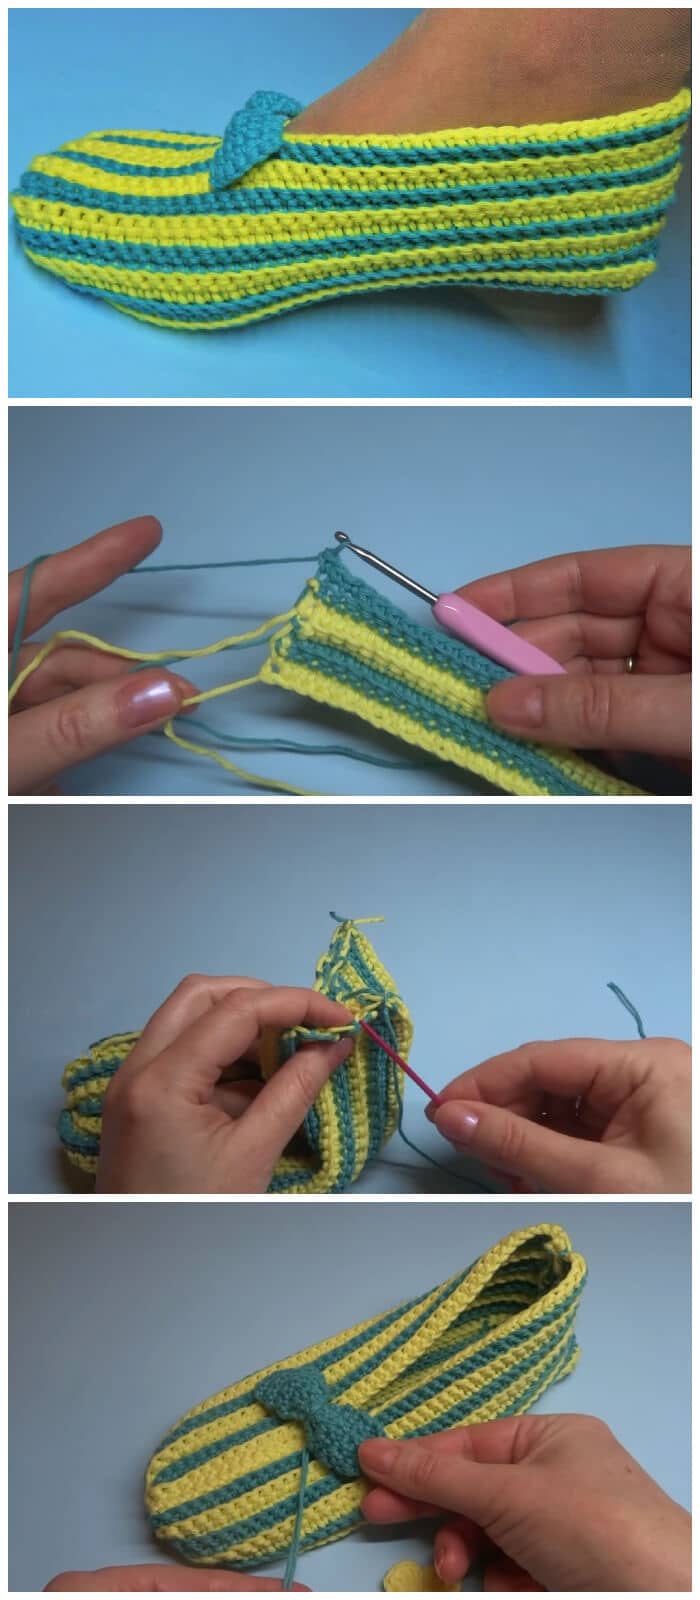 Here is  step by step instructions and video tutorial how to crochet simple slippers. This is a very simple crochet pattern worked primarily using single crochet stitches. Enjoy !